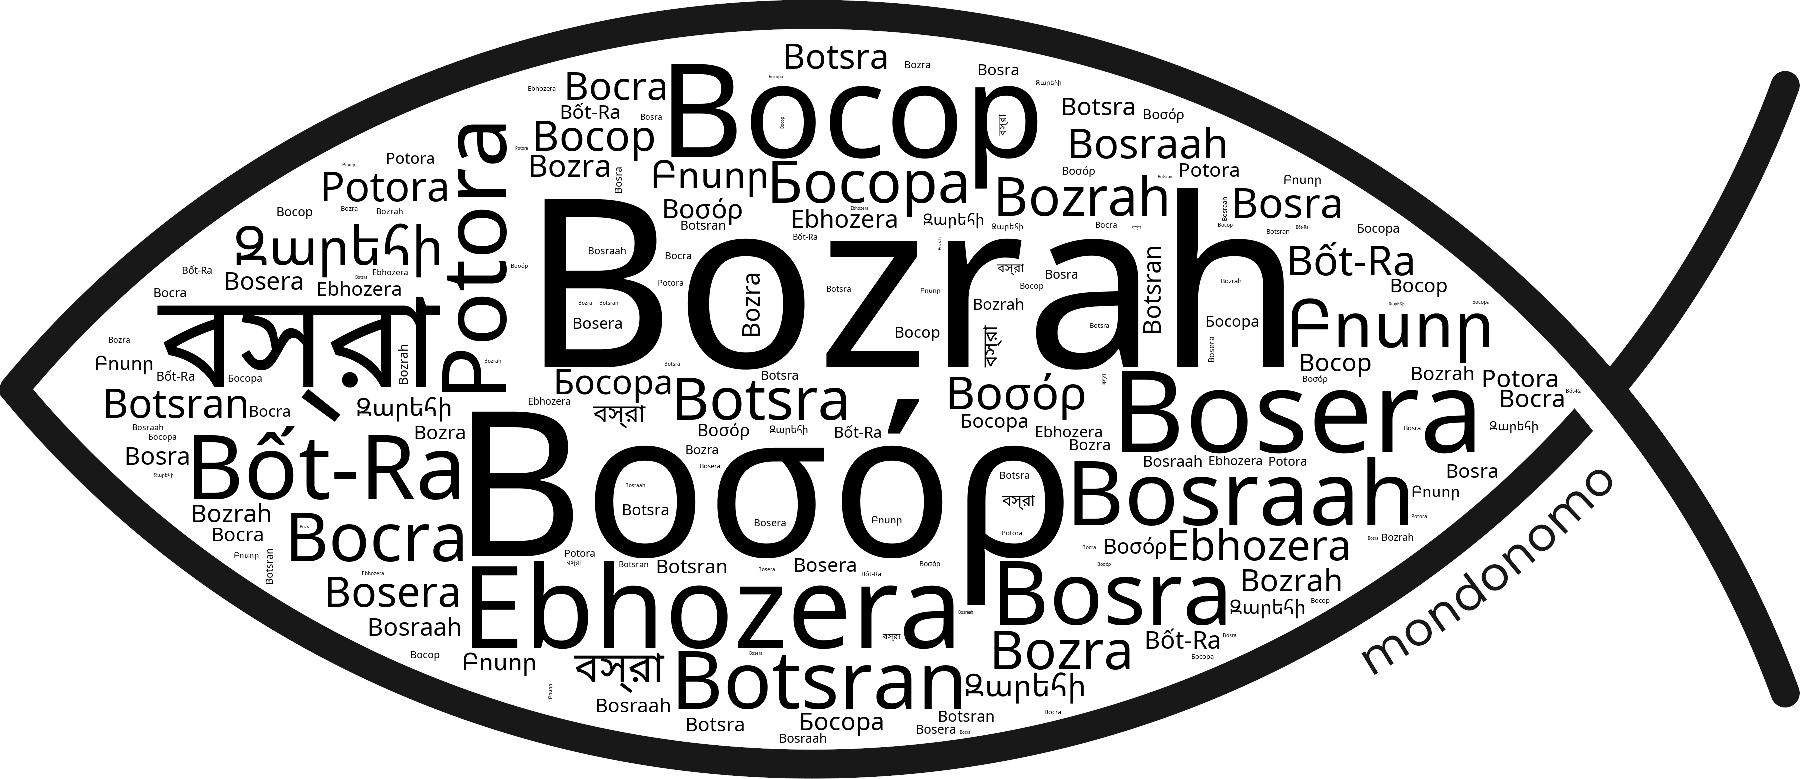 Name Bozrah in the world's Bibles